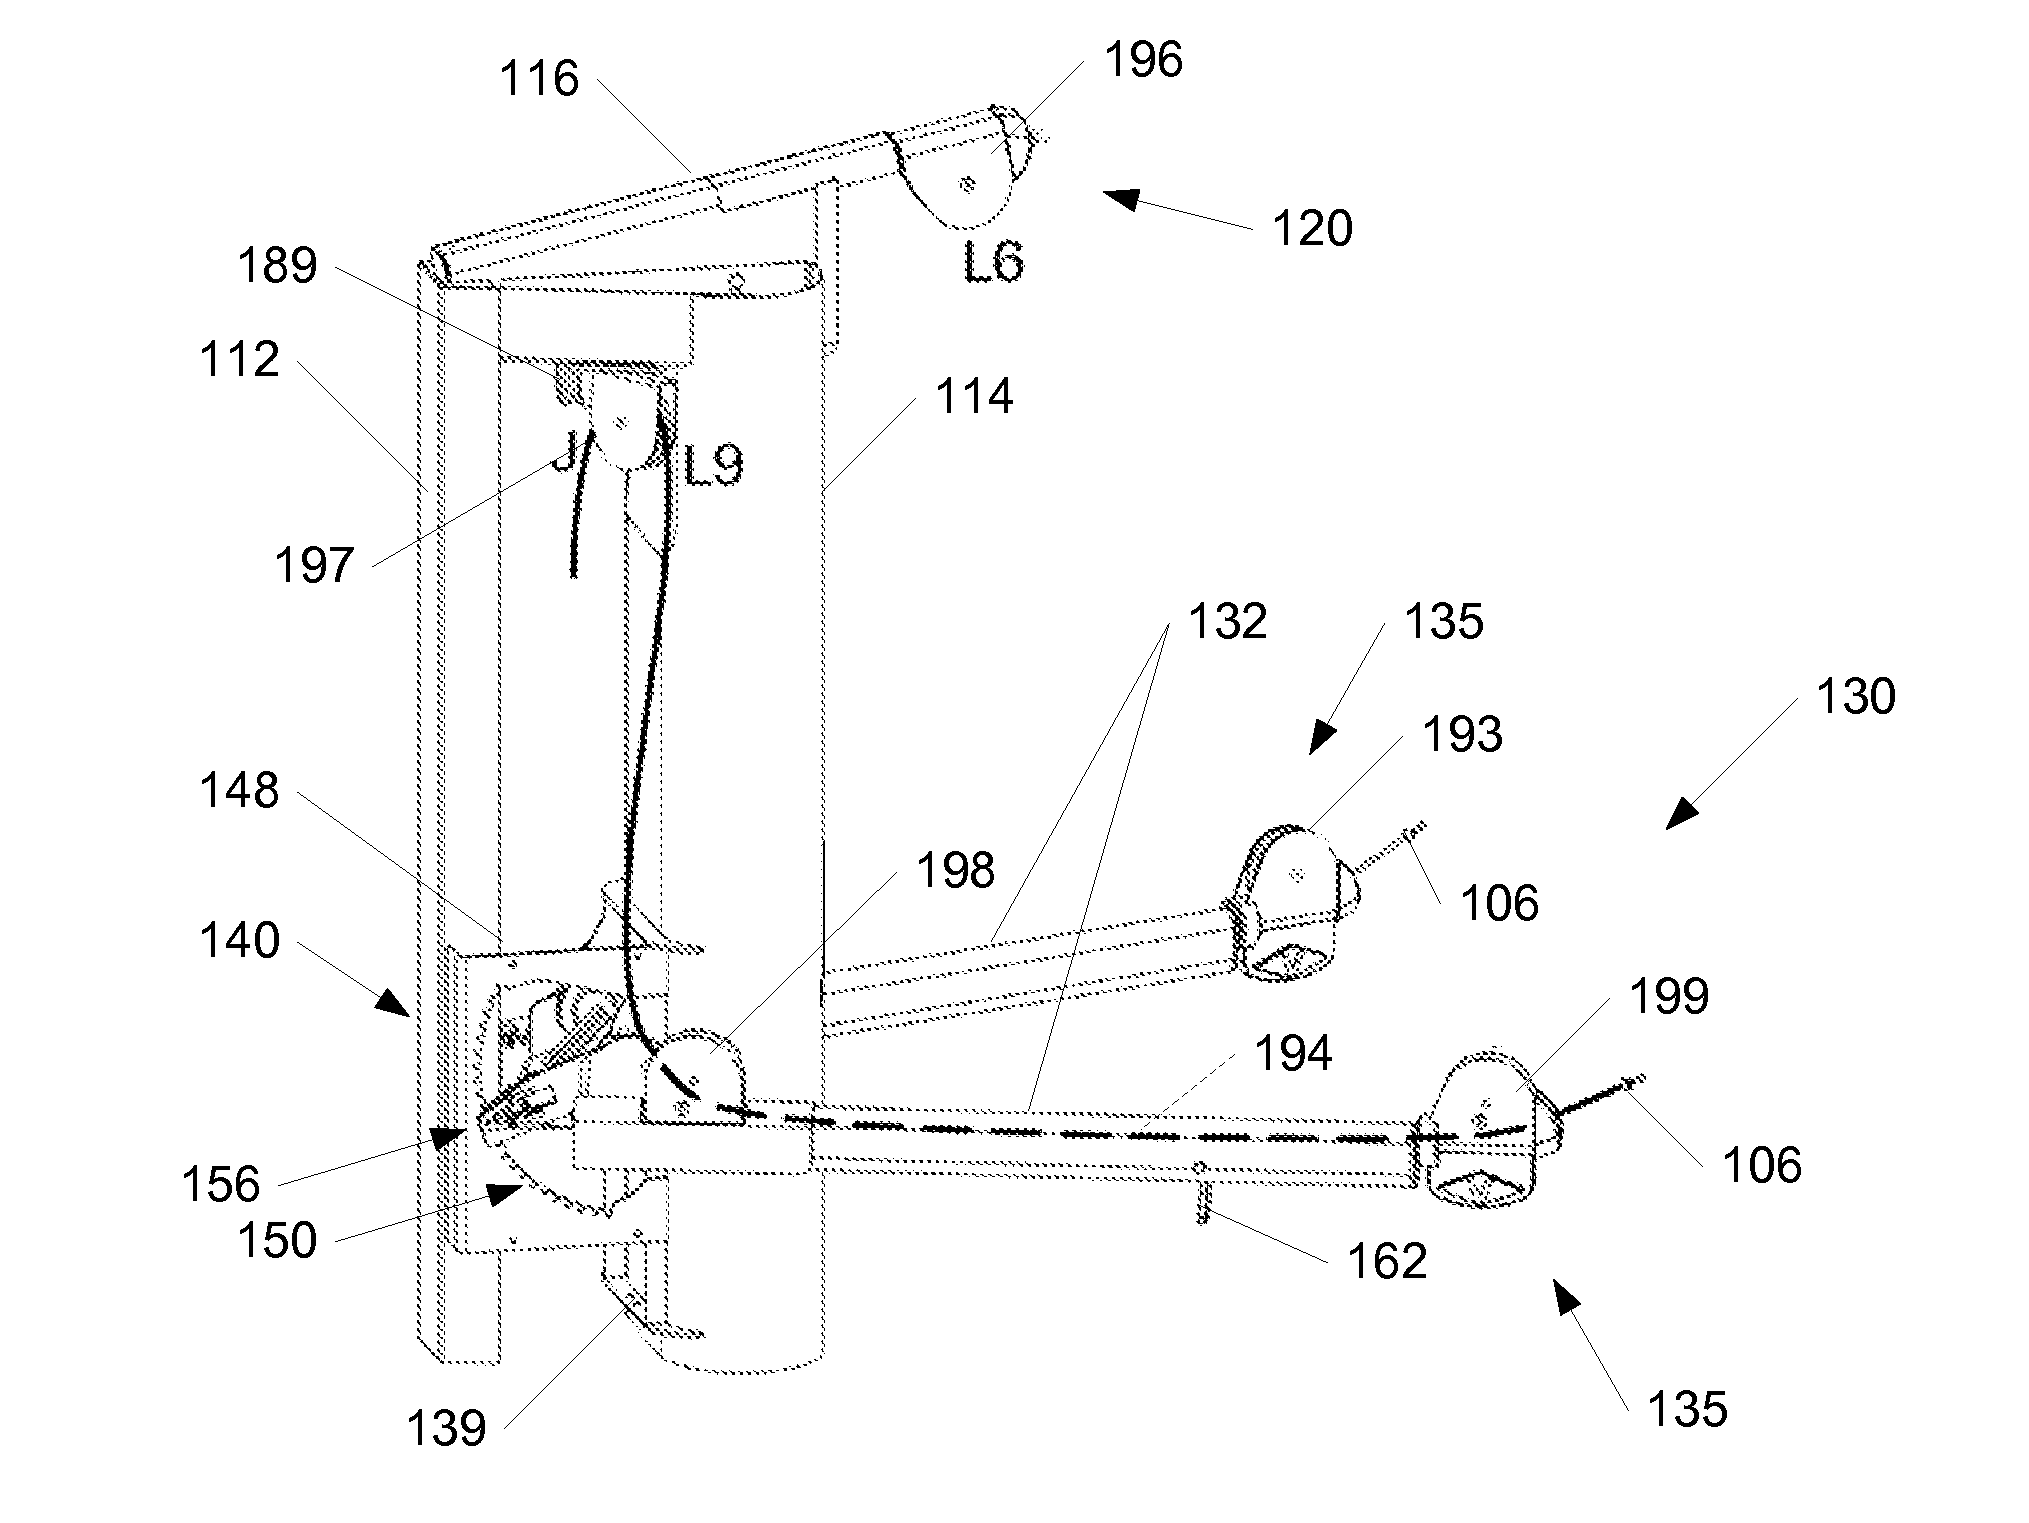 Functional training exercise apparatus and methods